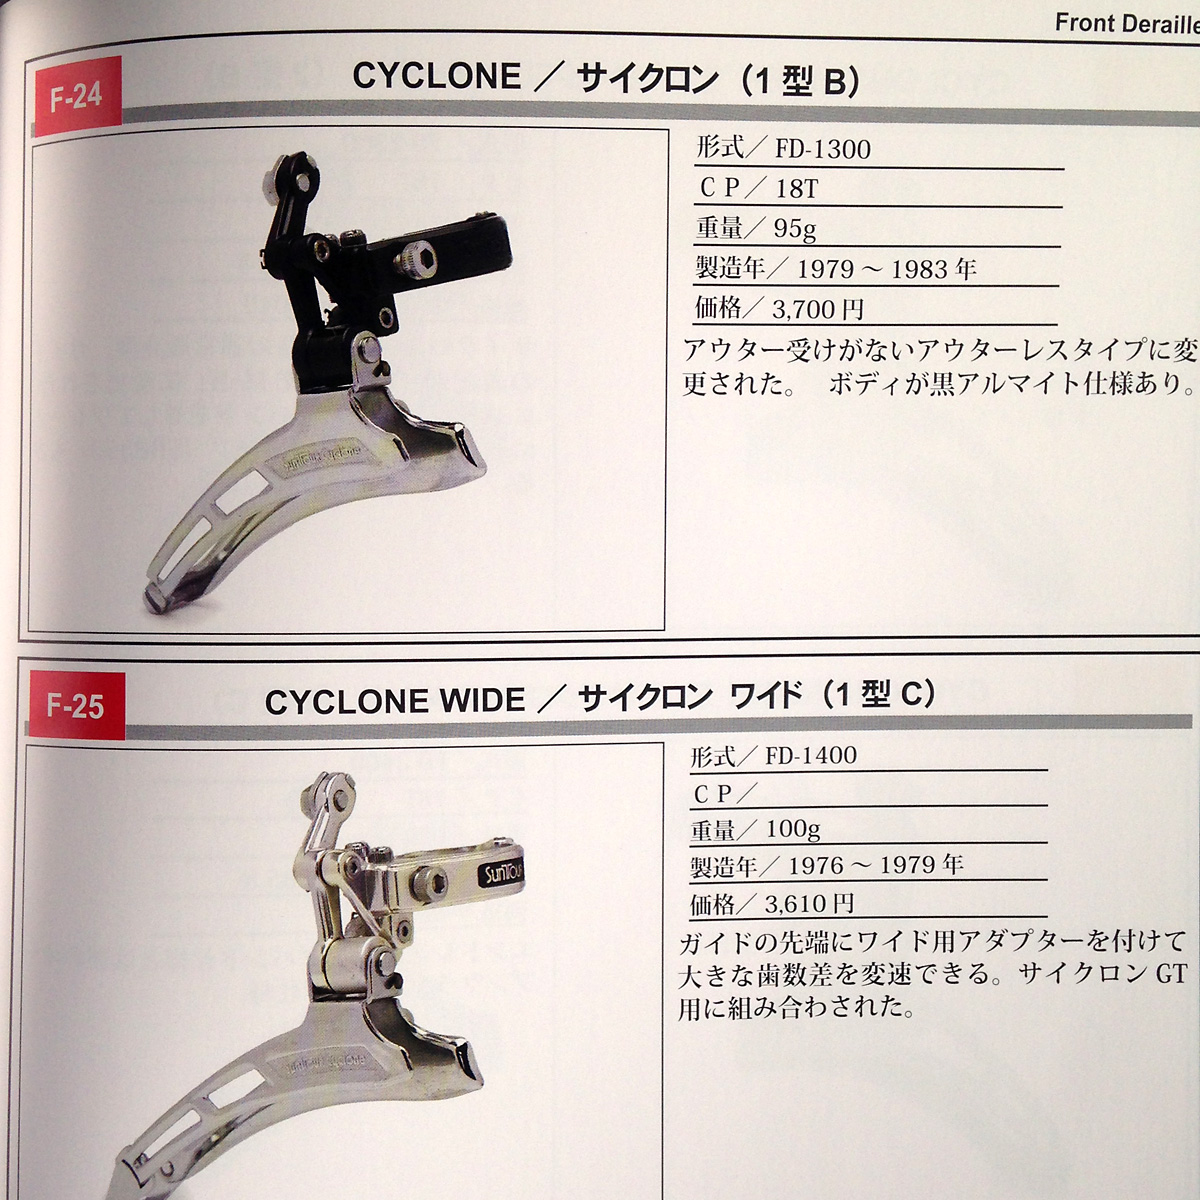 Suntour Cyclone and cyclone wide front derailleurs